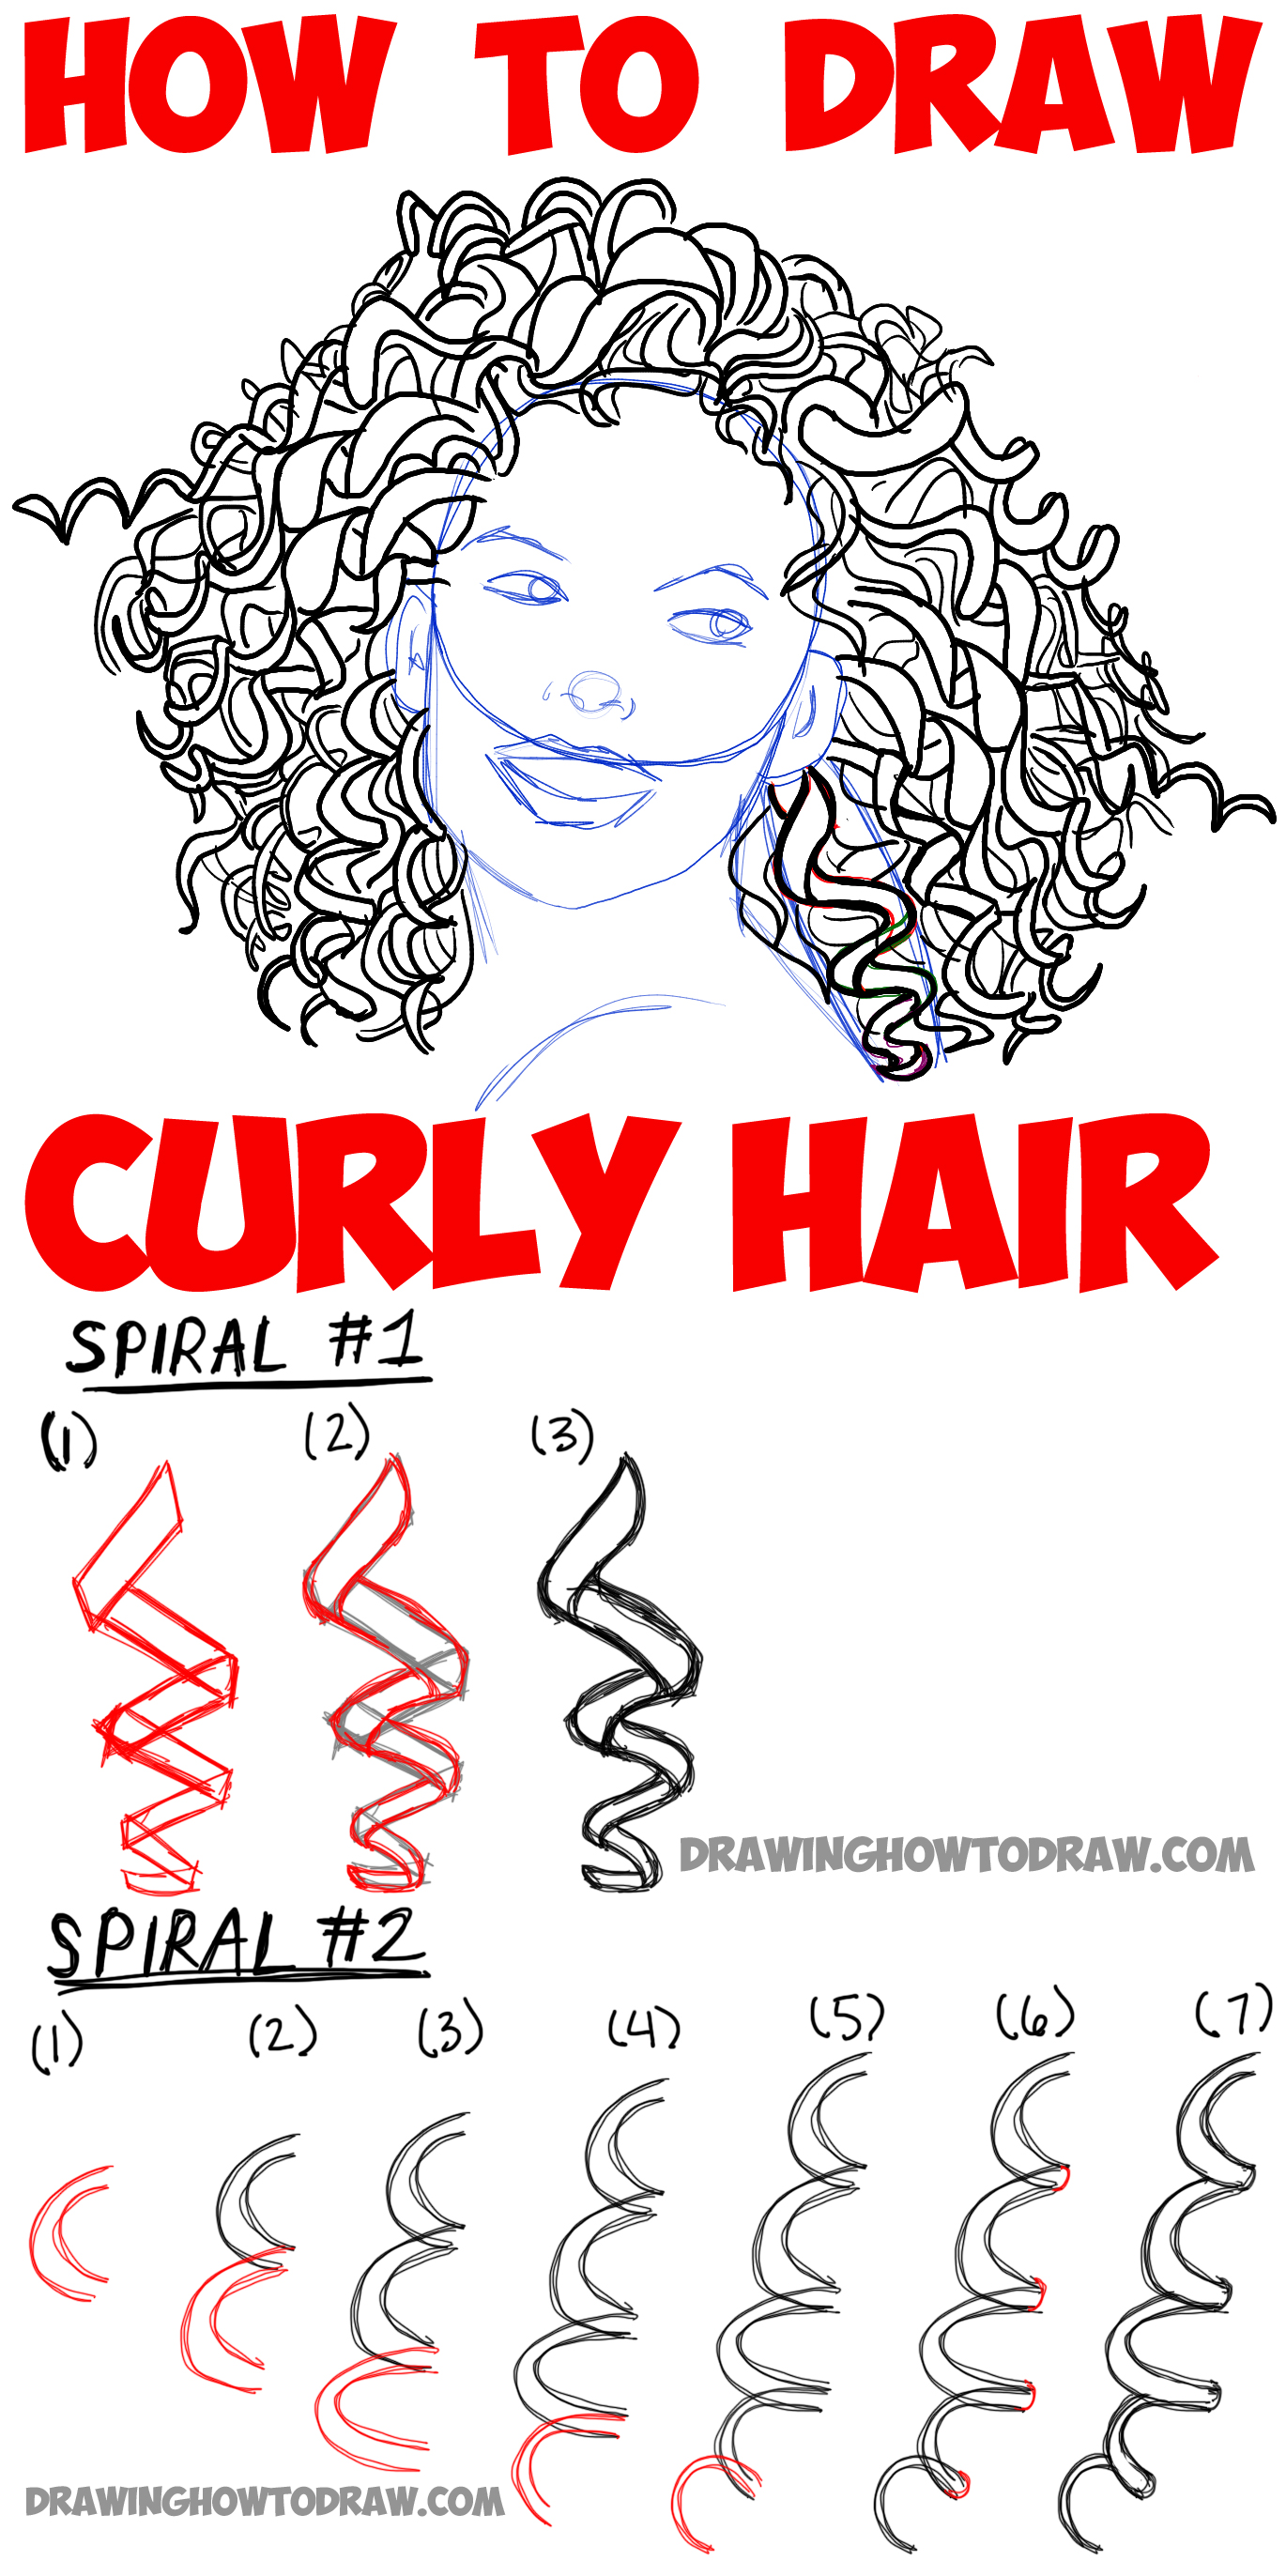 Curly hair how to draw how